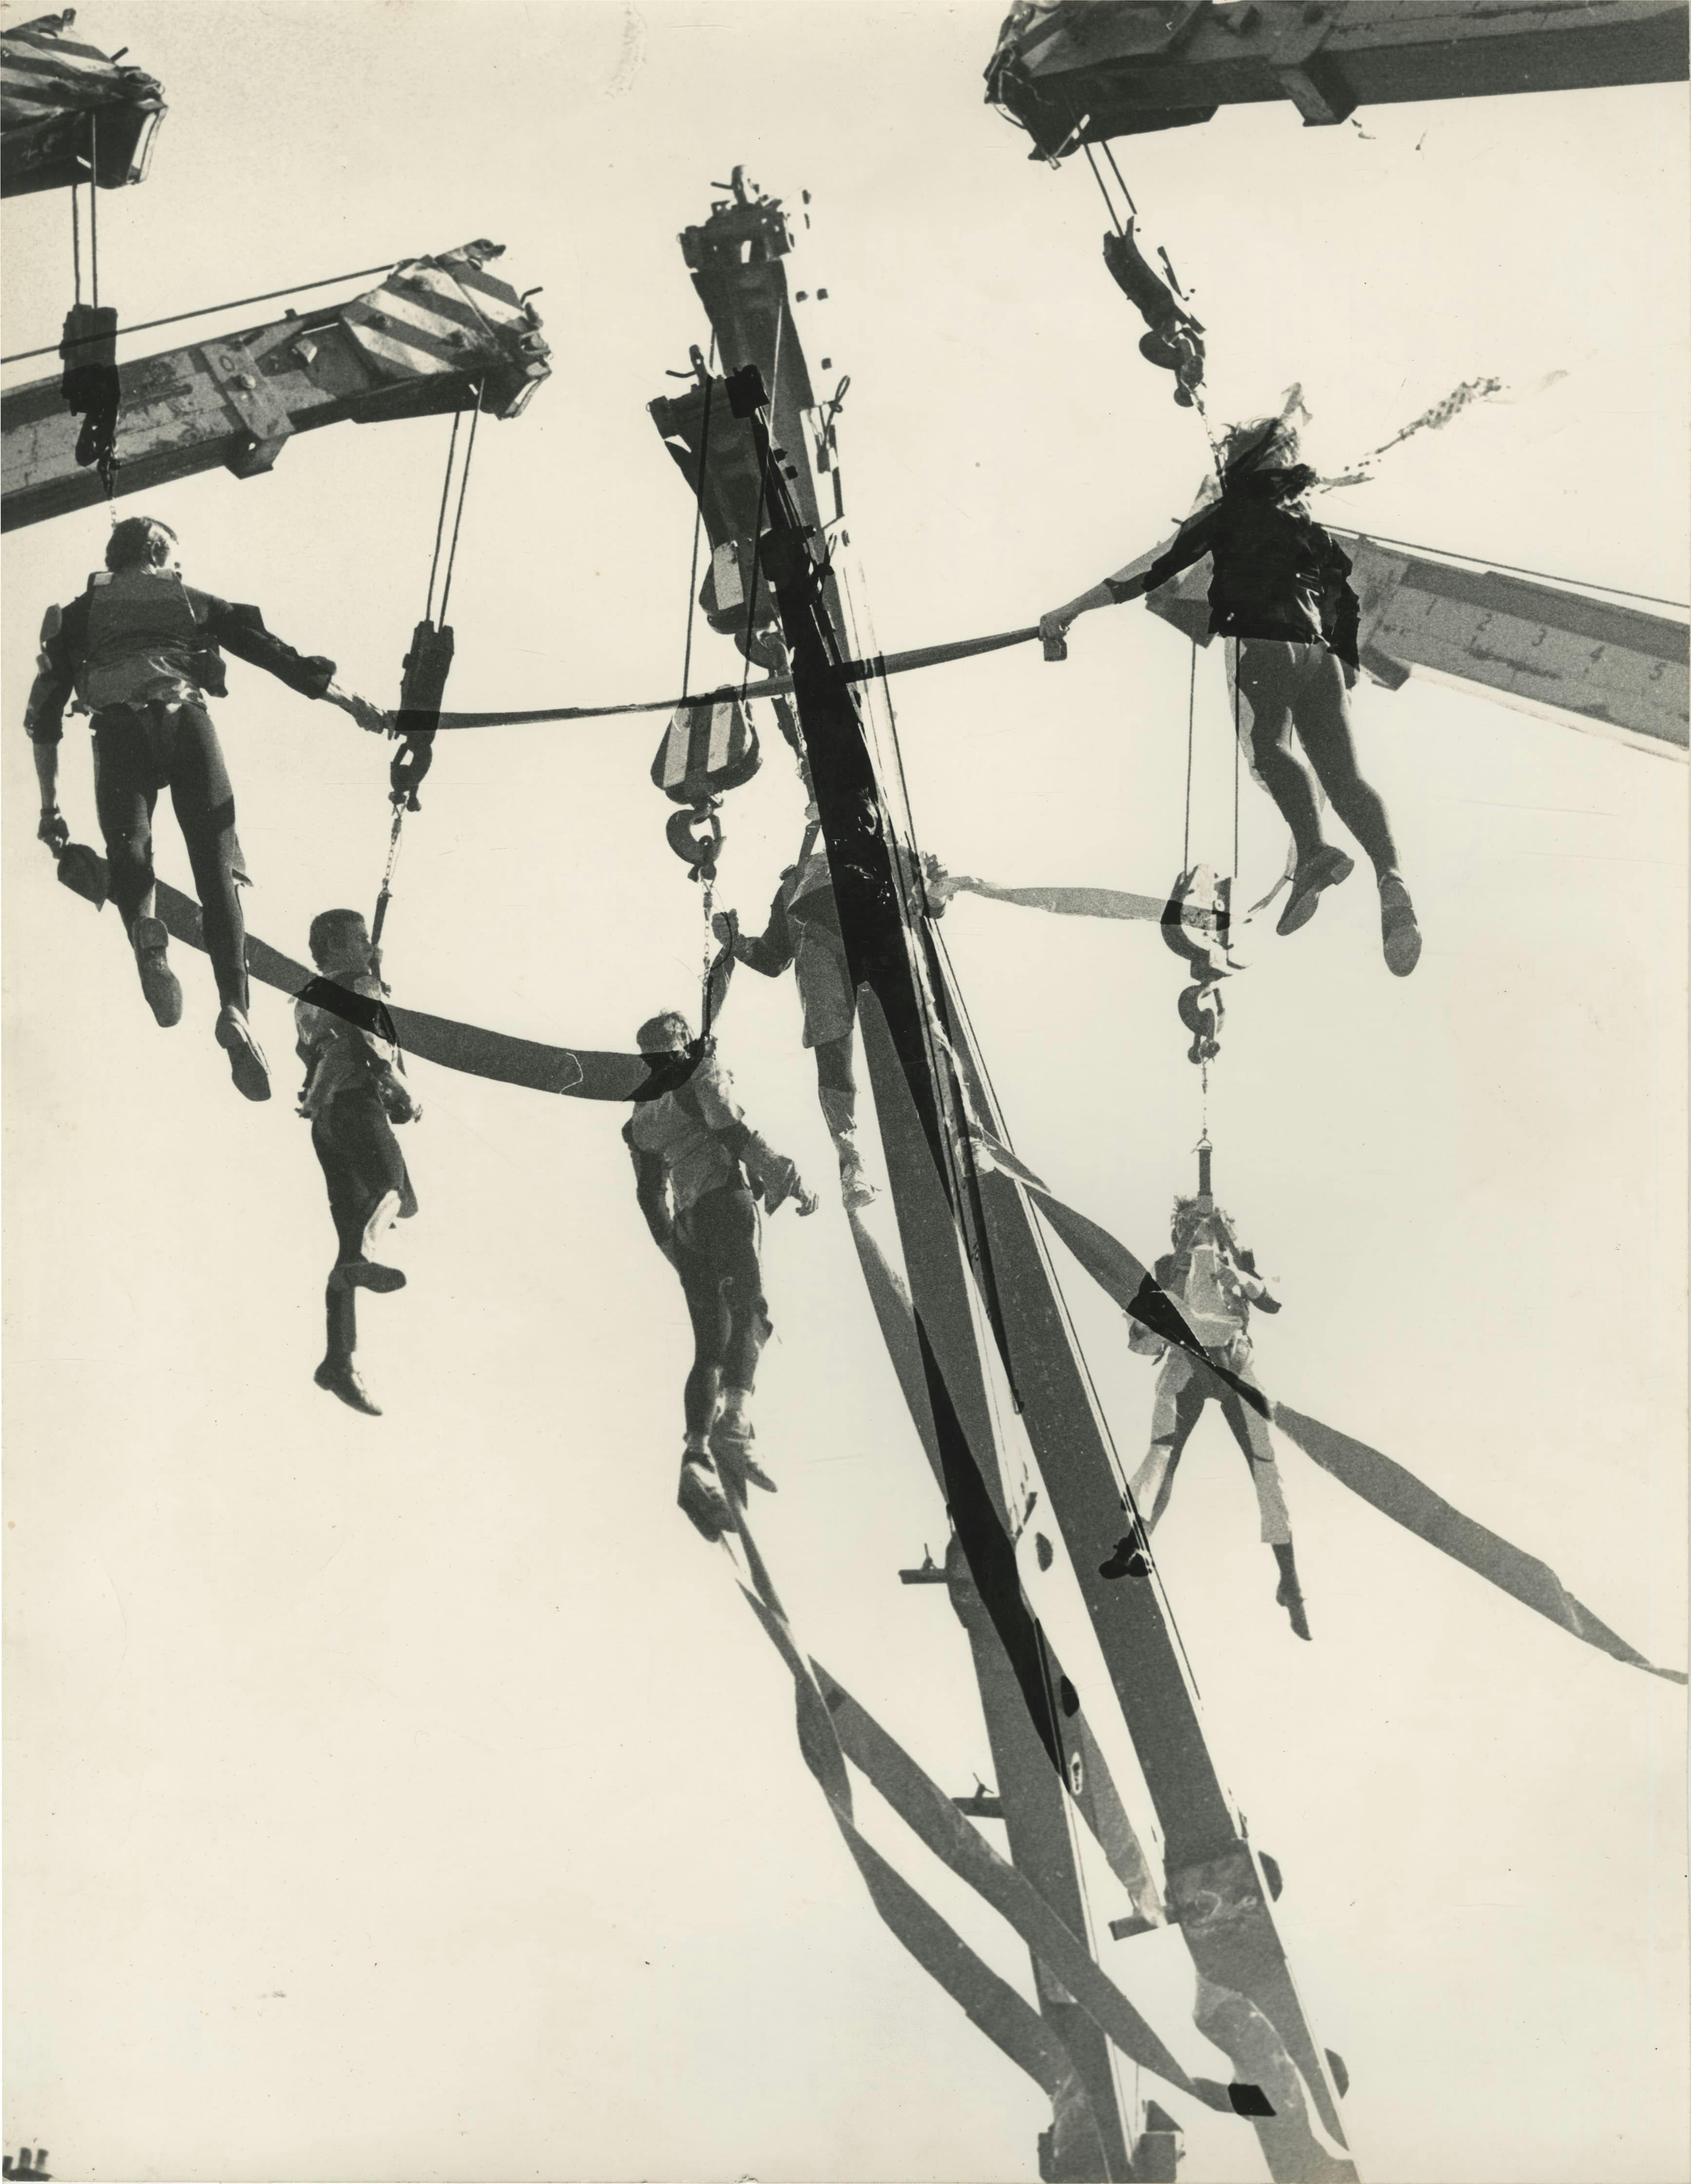 The image shows a black-and-white photomontage taken during the performance or rehearsal of Leopoldo Maler’s Crane Ballet. In the composite image, the arms of six cranes enter the white space of the sky from various angles—two from the upper left, two from the upper right, and two from directly below—and overlap in the center of the image. From each of these crane arms, a harnessed acrobatic performer hangs, many of them trailing or holding onto thick ribbons that hang from their costumes and connect them to one another.